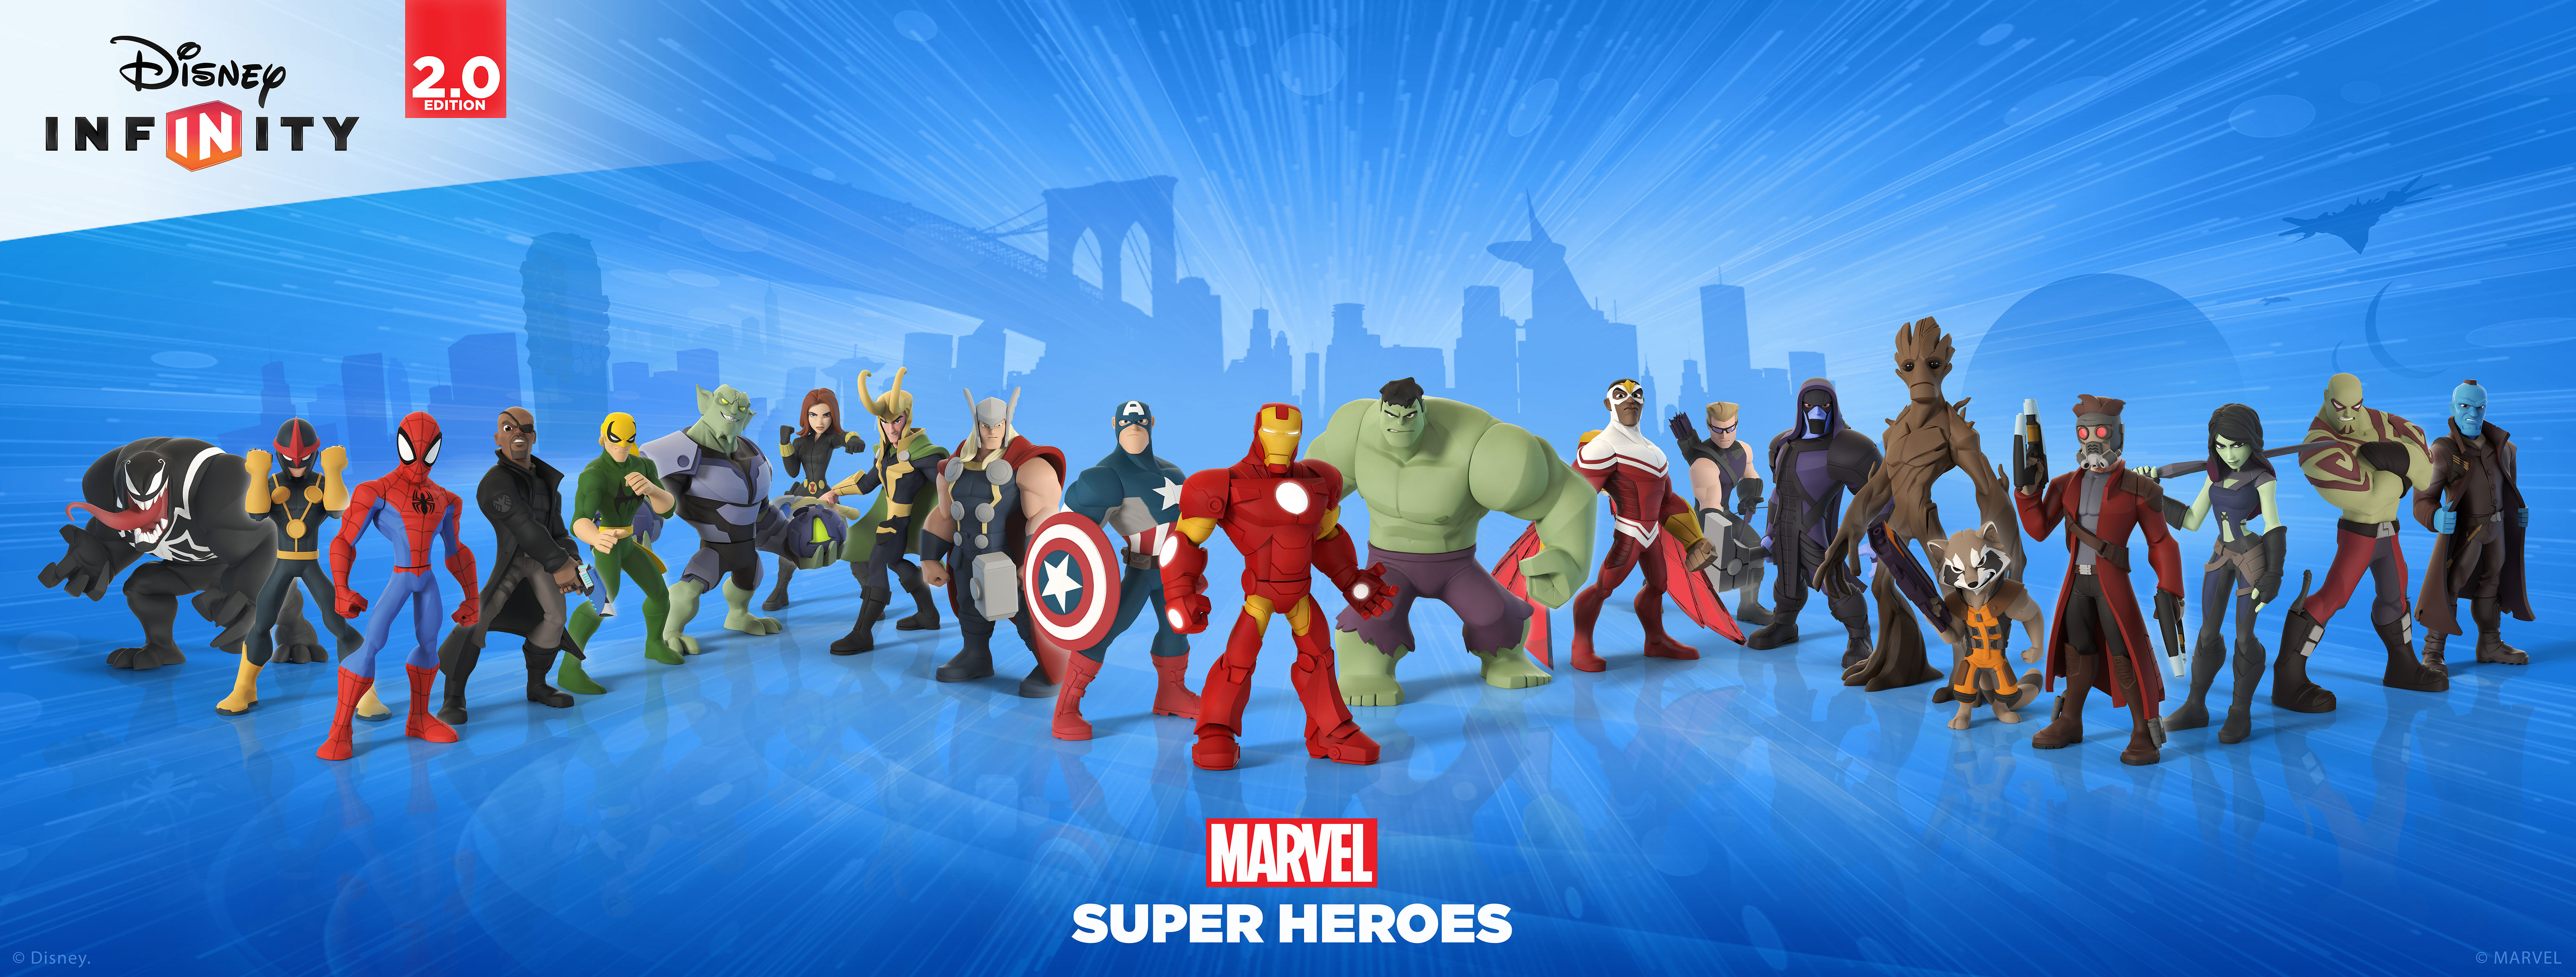 Disney Infinity Marvel Super Heroes Game On Playstation 3 And 4 ~ Playboxonline